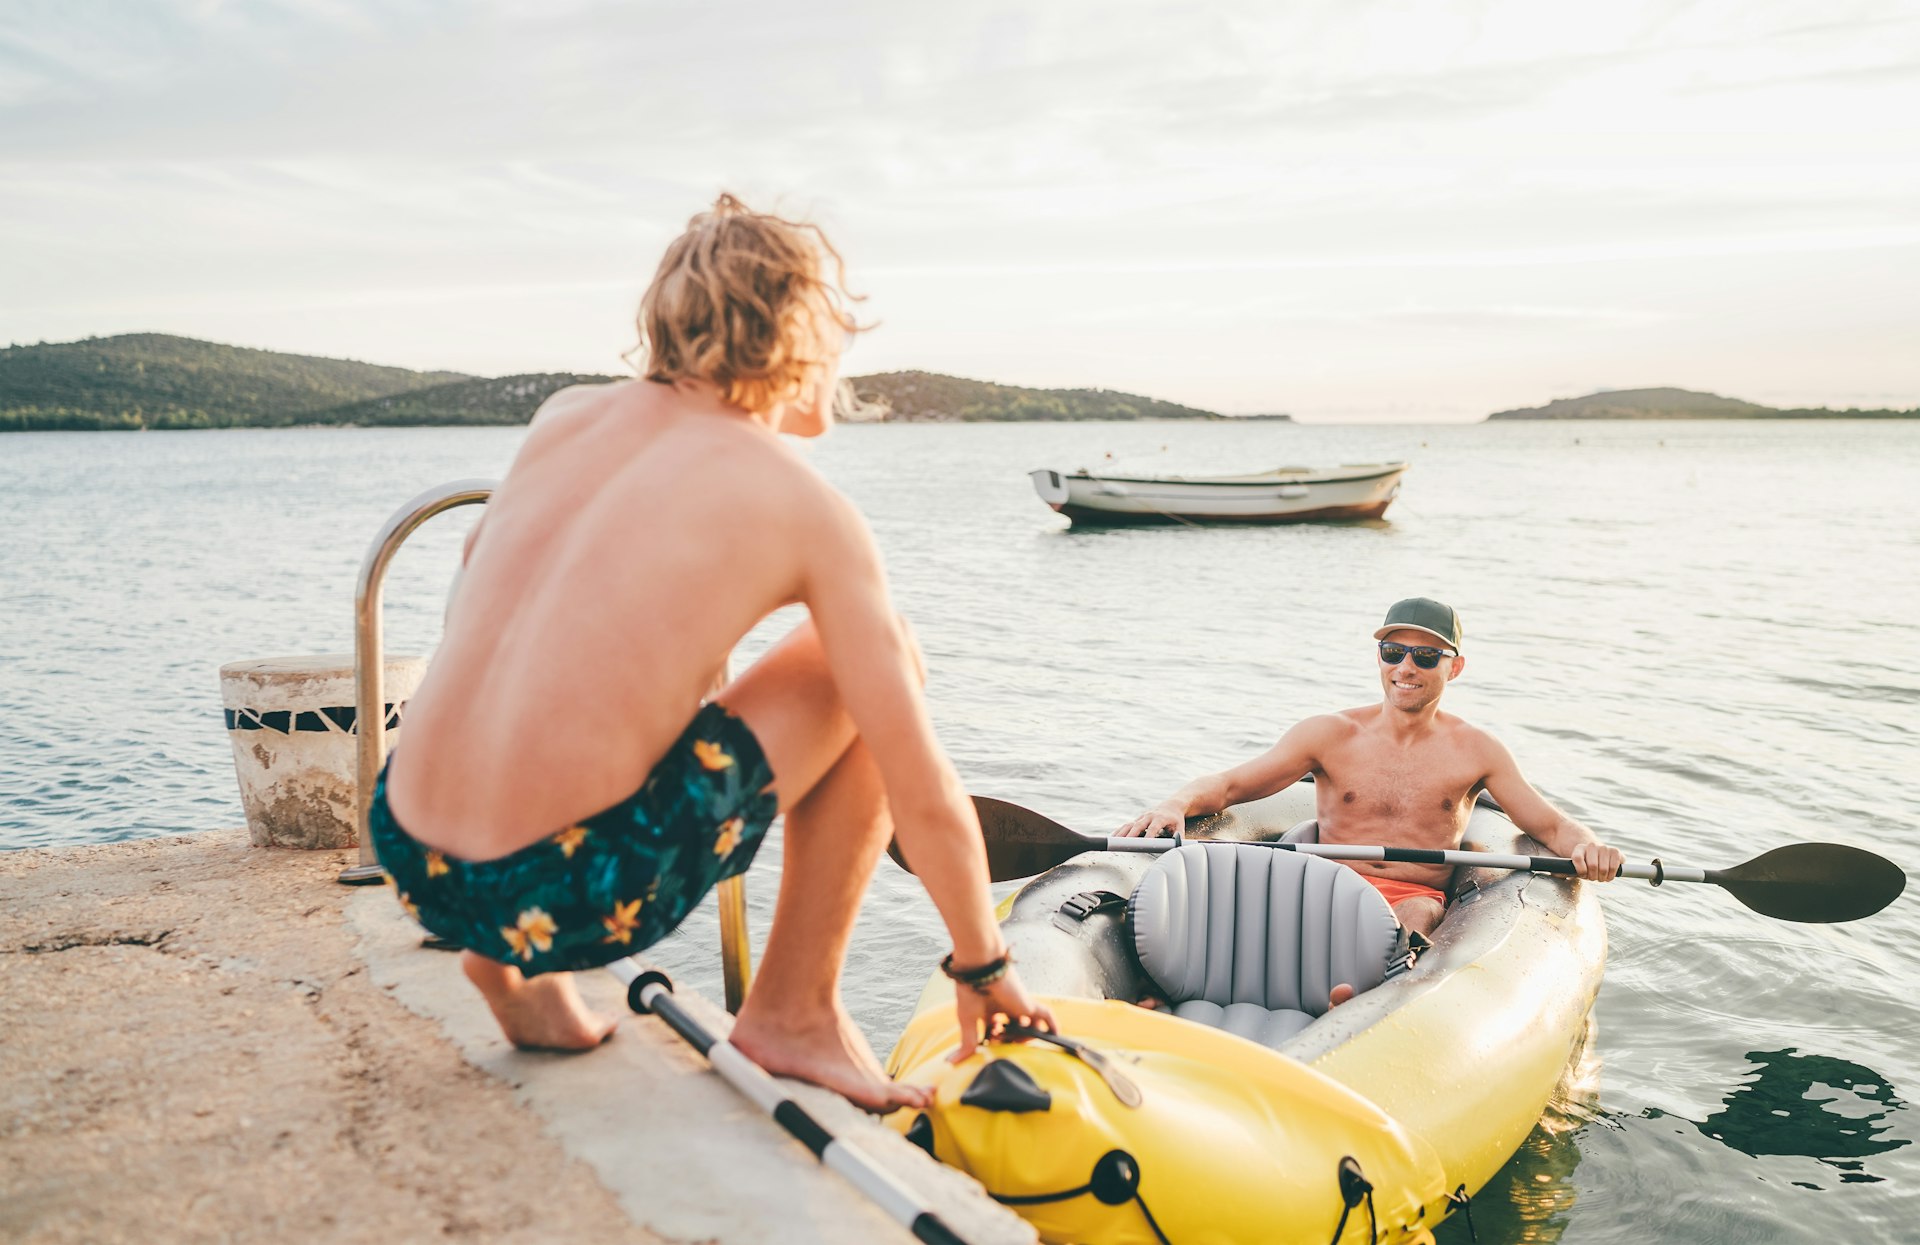 A father and his teenager son on a bright yellow inflatable kayak returning back from an evening ride in the Adriatic Sea near Šibenik, Croatia